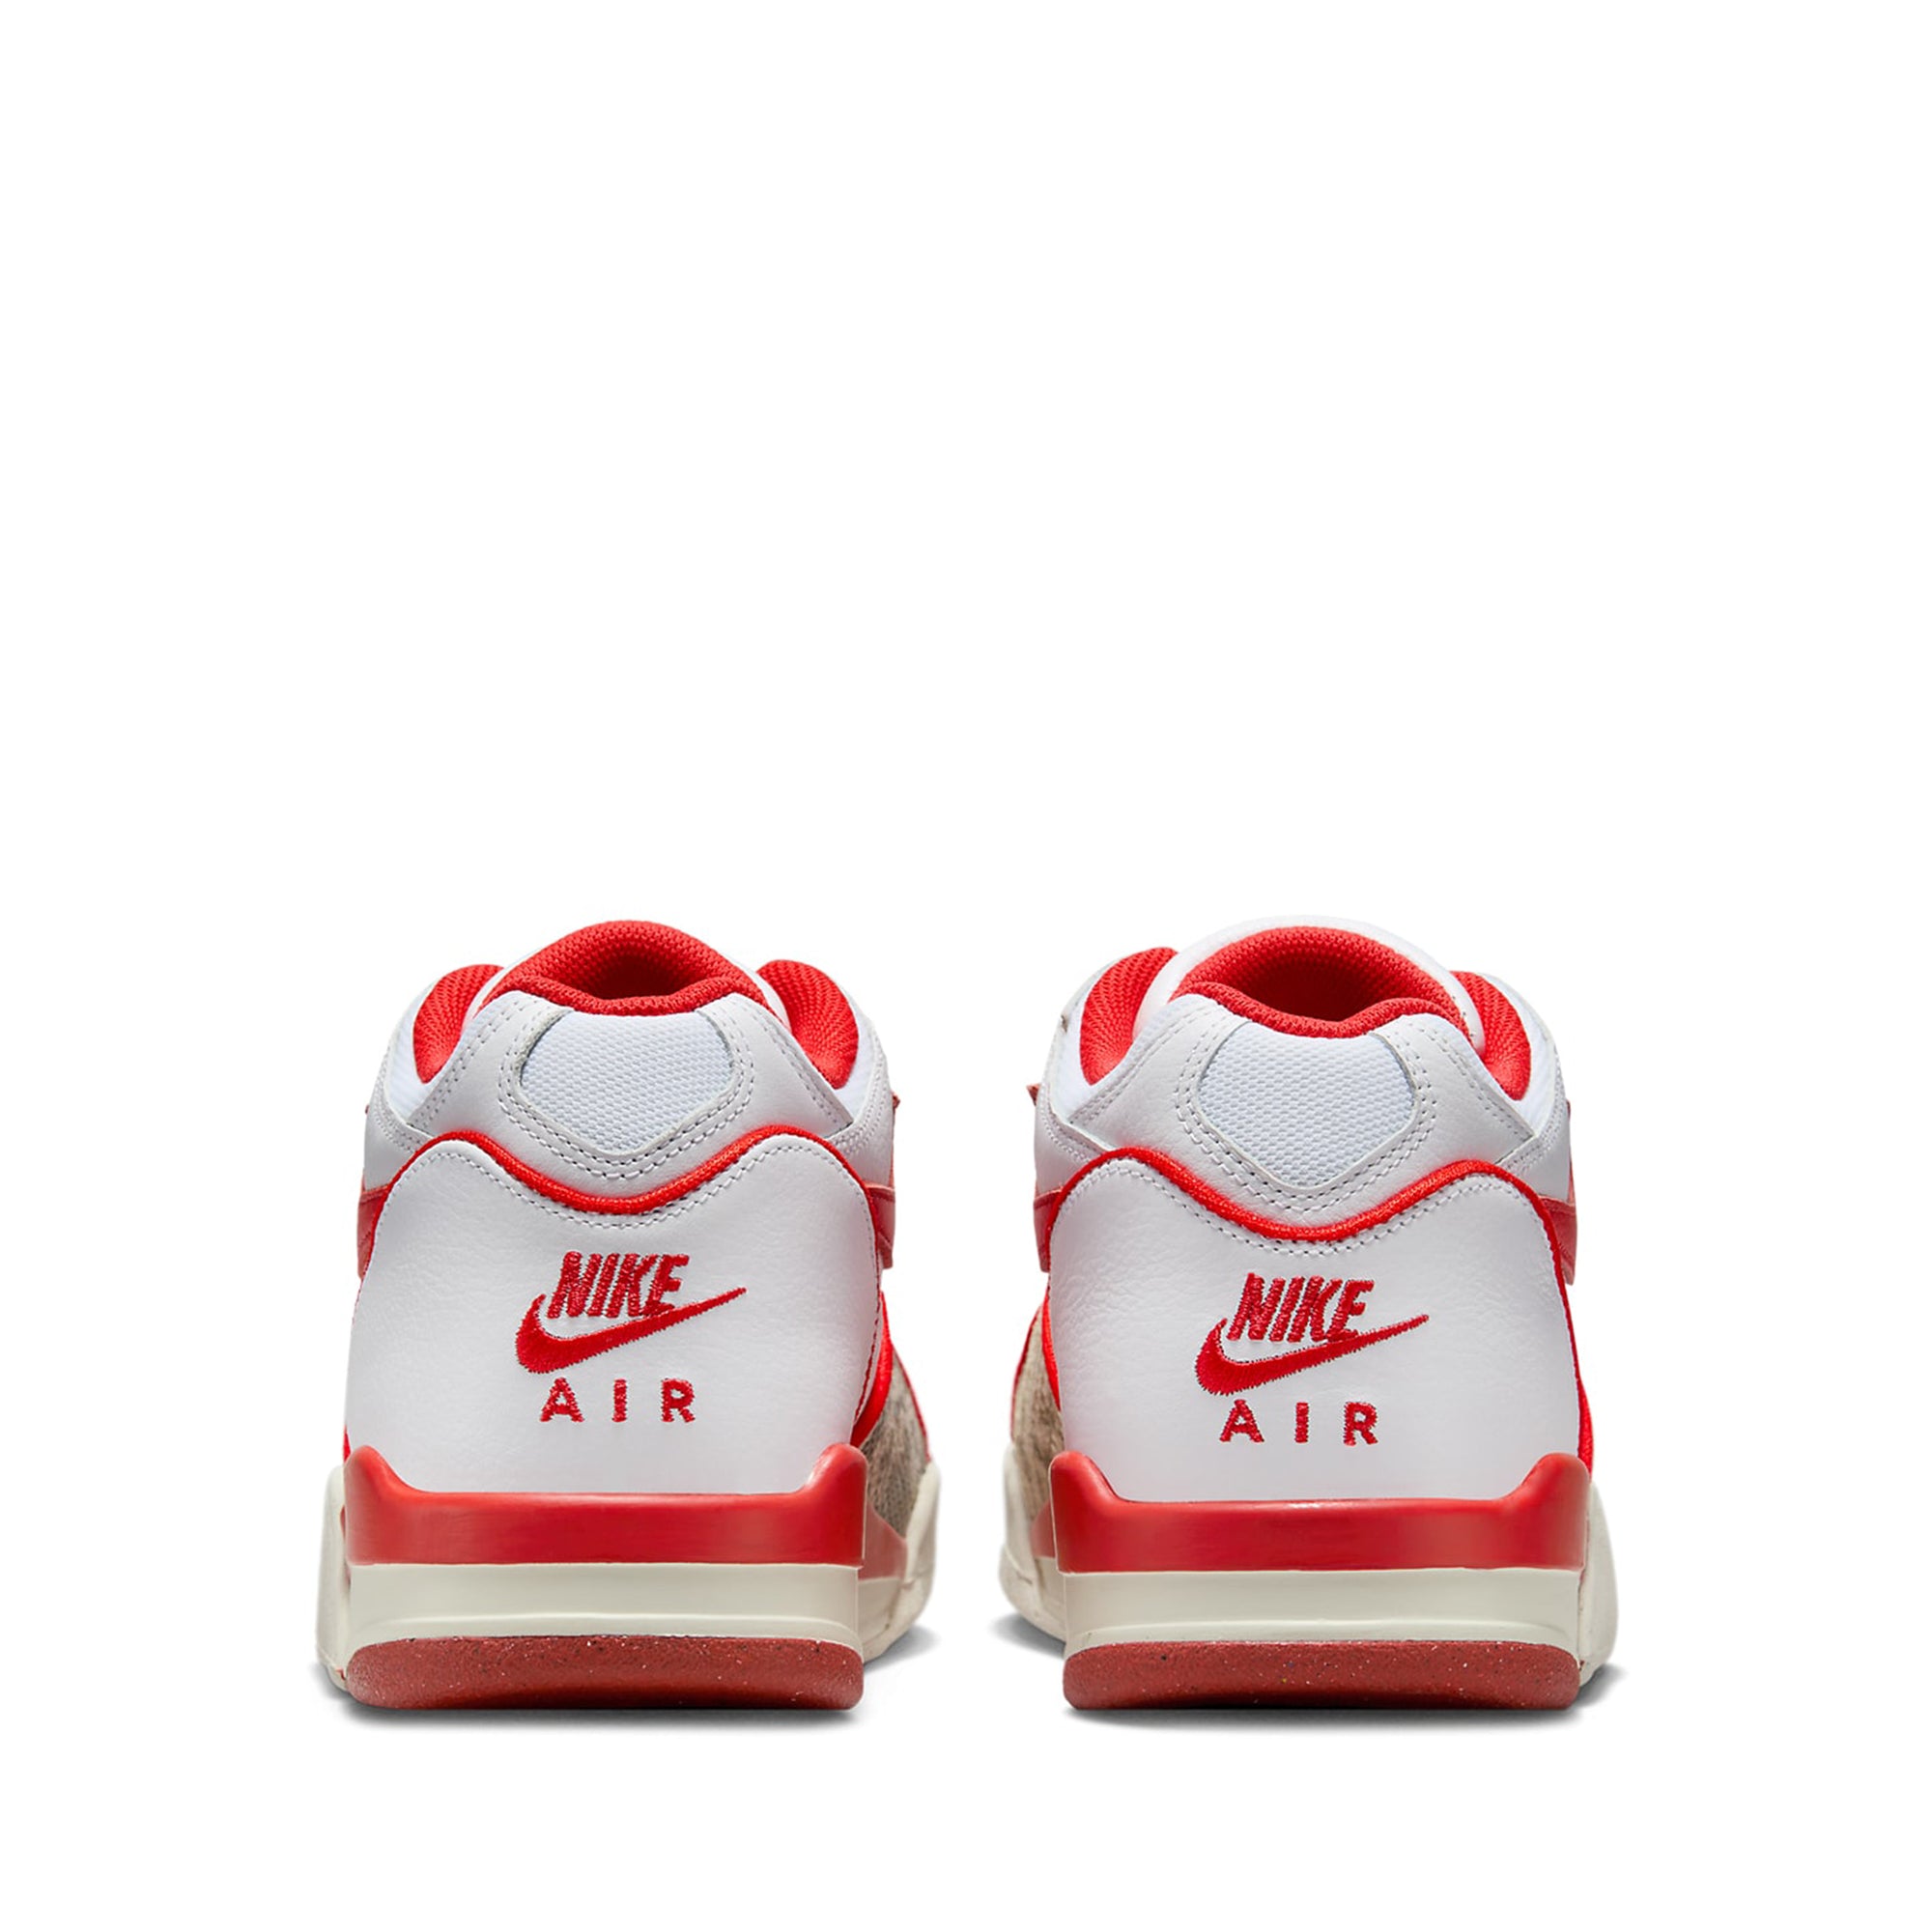 NIKE - Stüssy Men's Air Flight '89 Low SP - (White/Red) view 5